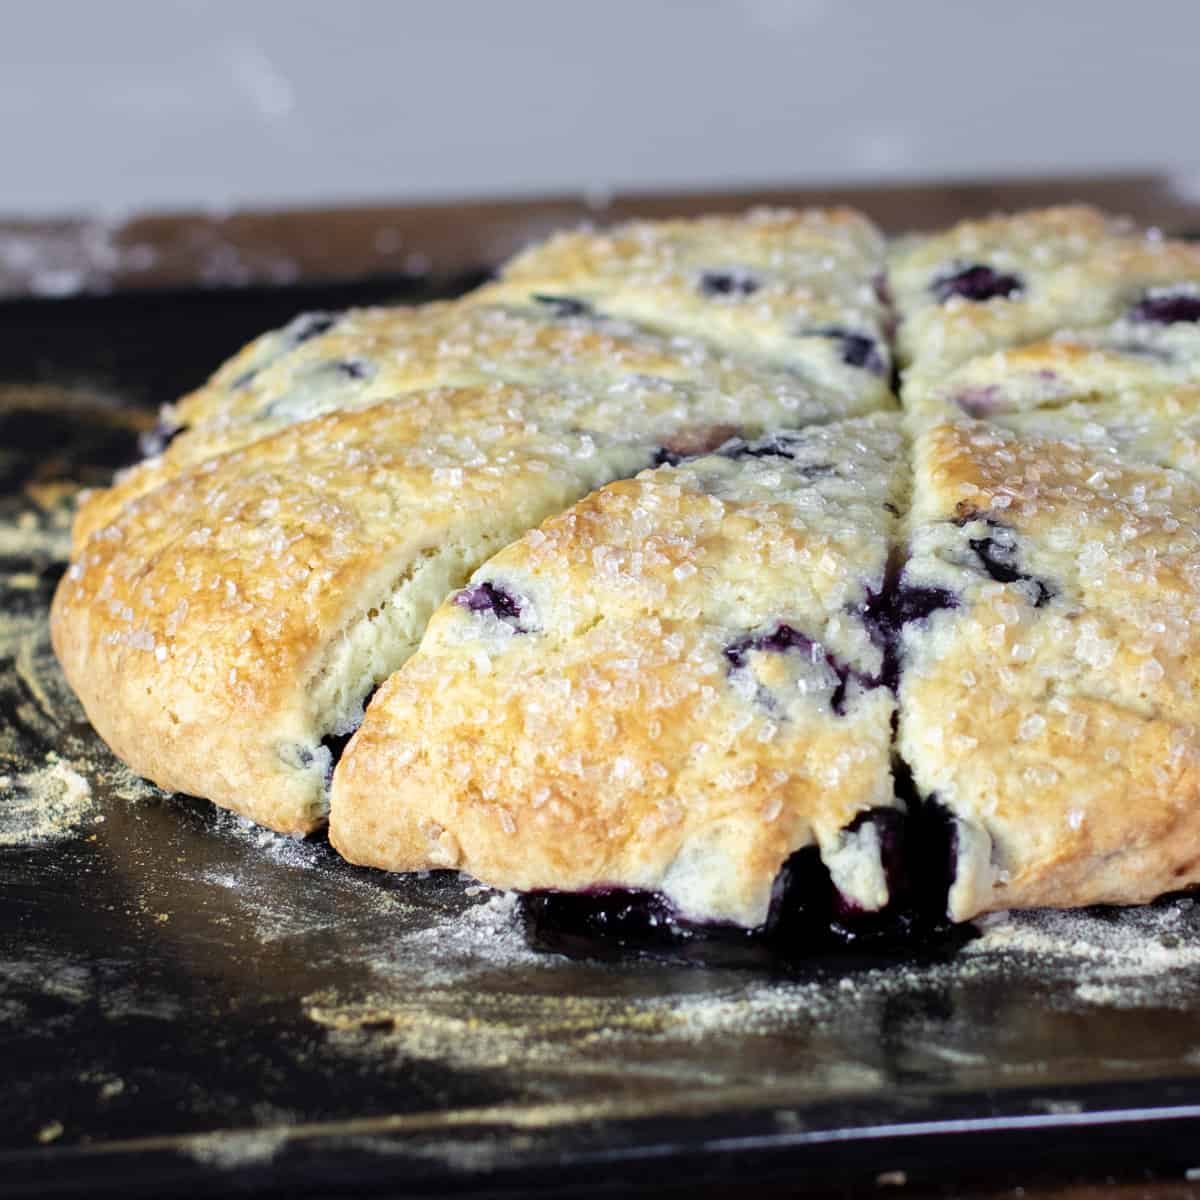 Fresh baked blueberry scones just out of the oven.